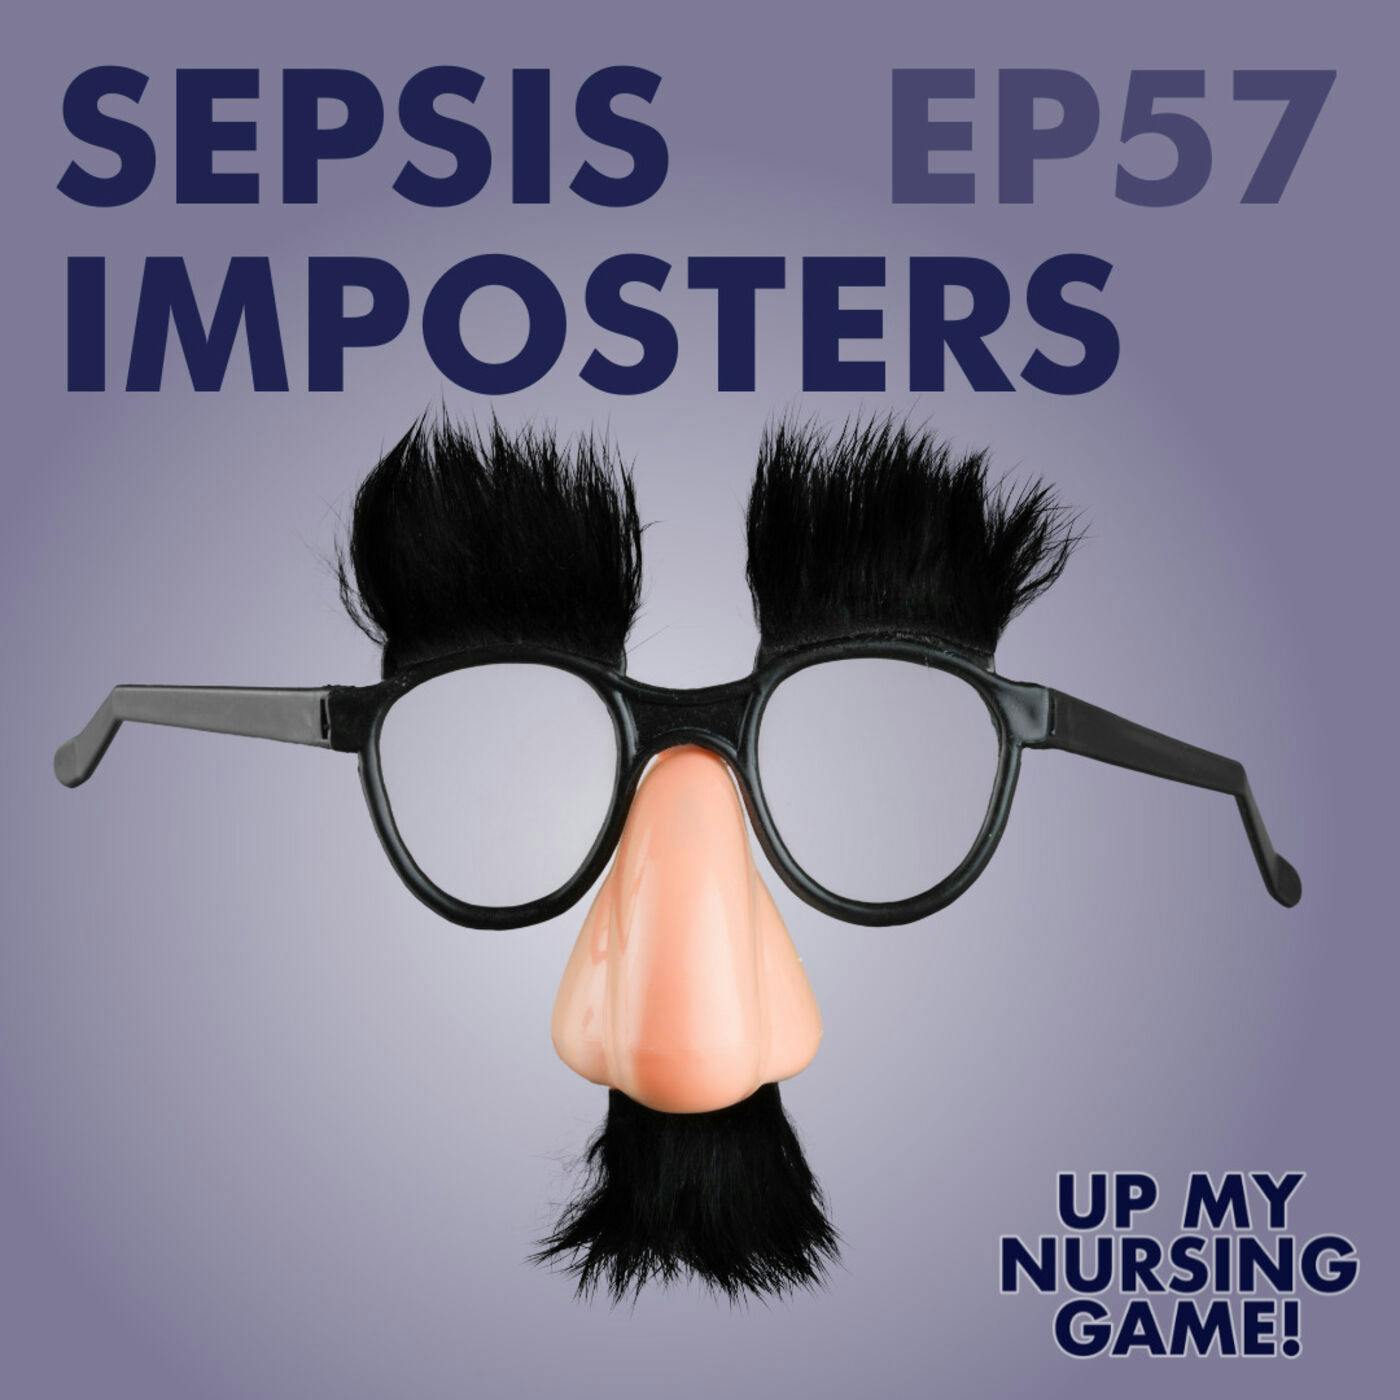 Sepsis Imposters: Don't be fooled!